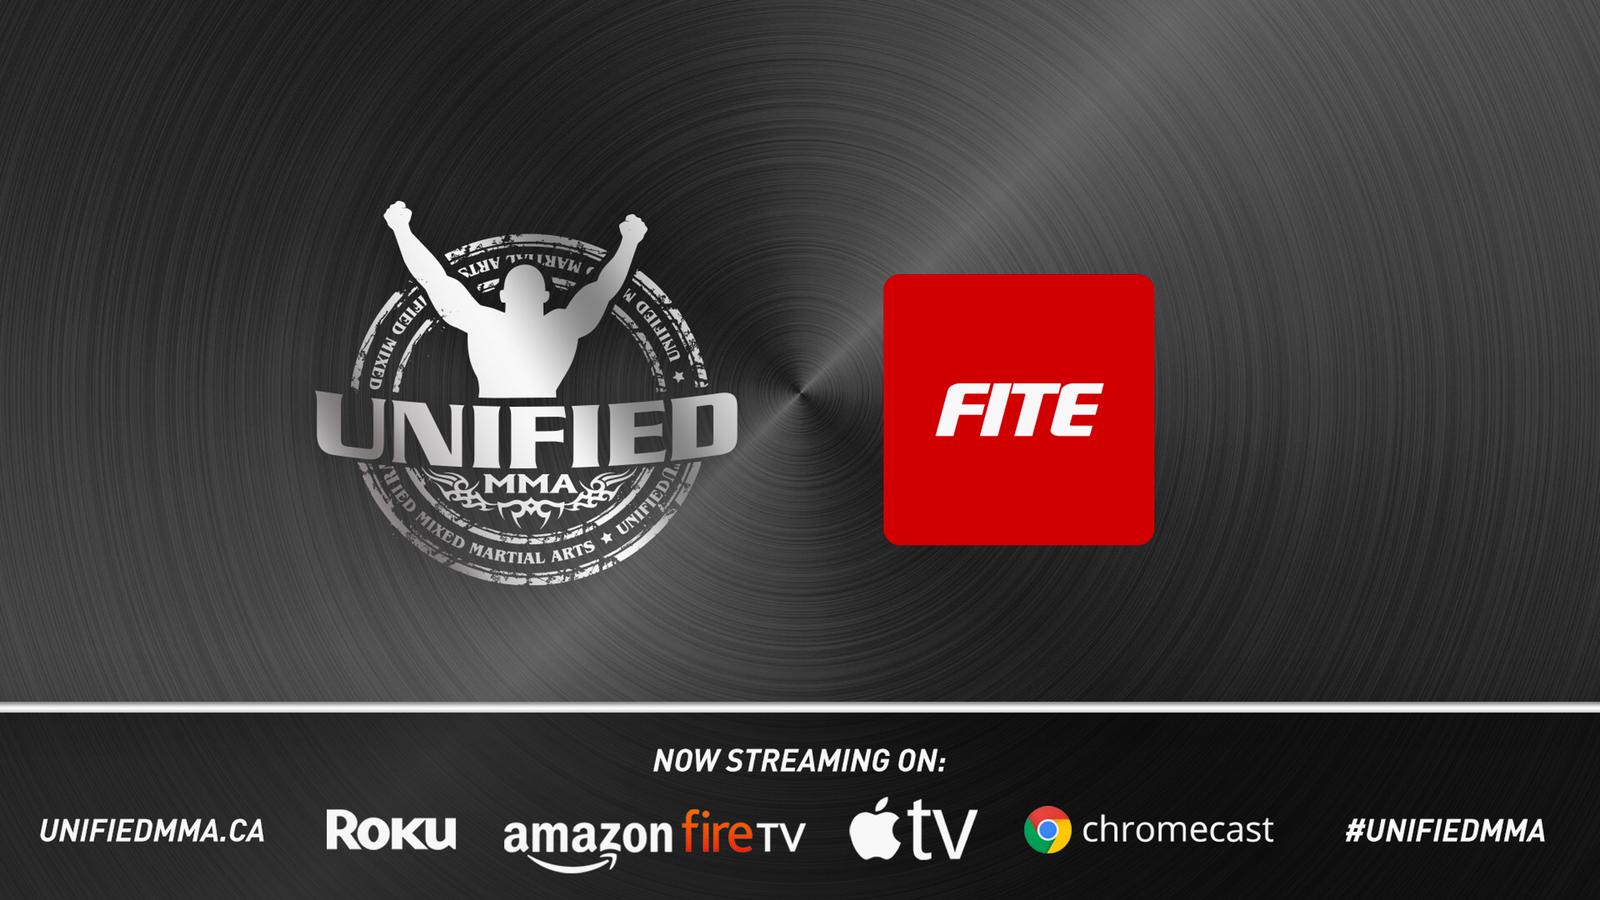 Unified MMAs partnership with Fite adds additional platforms